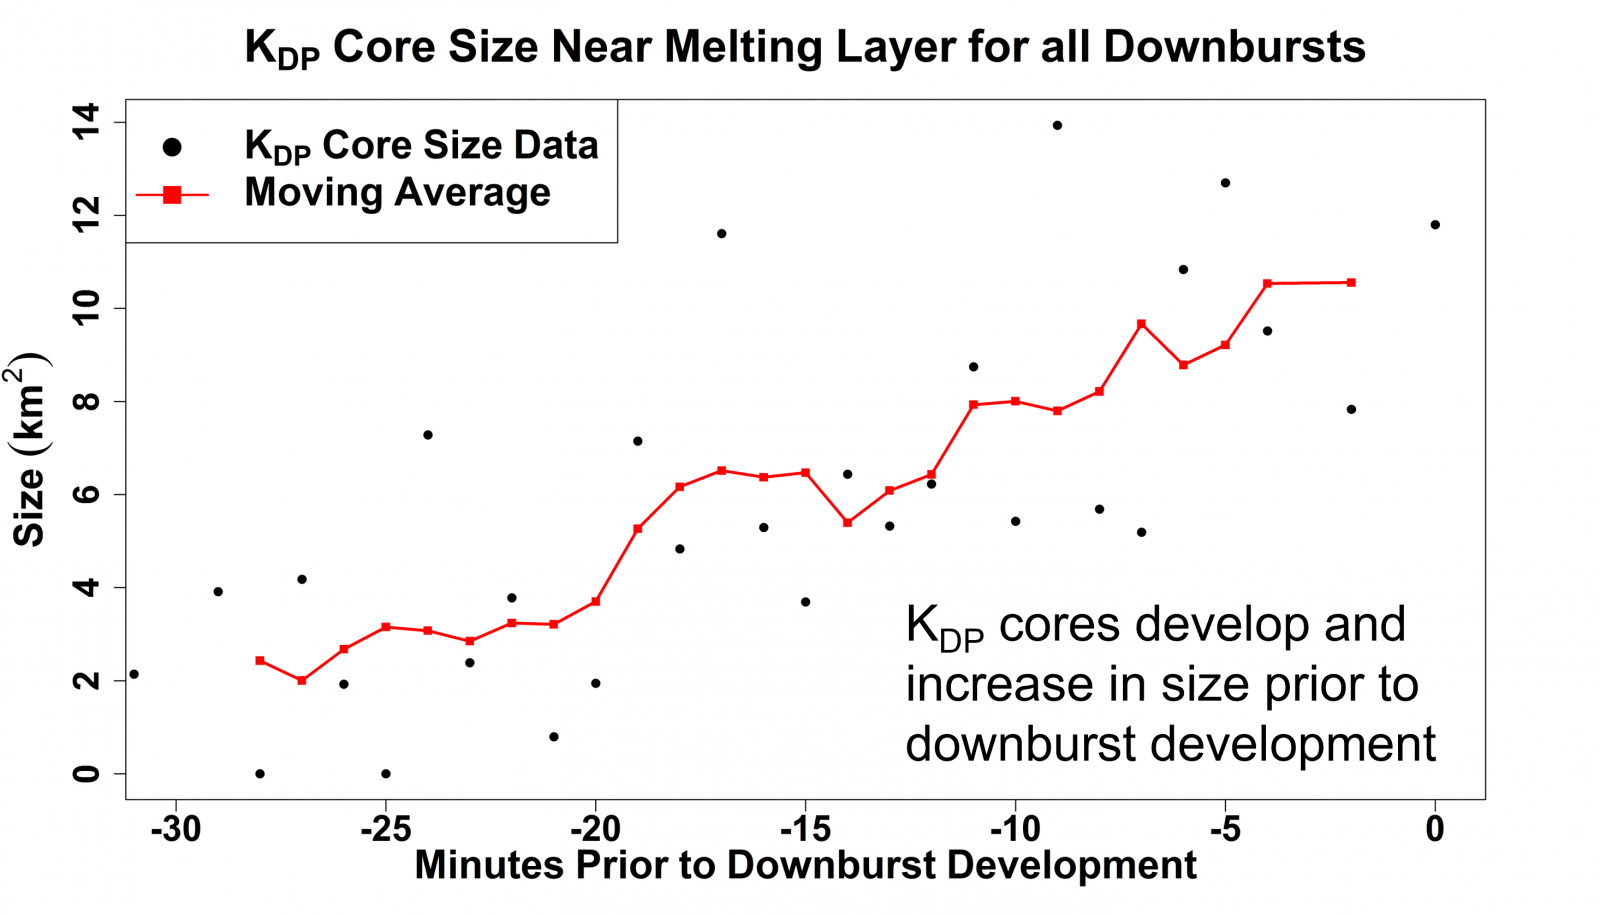 KDP core size (red line) generally increases in the 30-minute period prior to downburst development. (Photo provided)